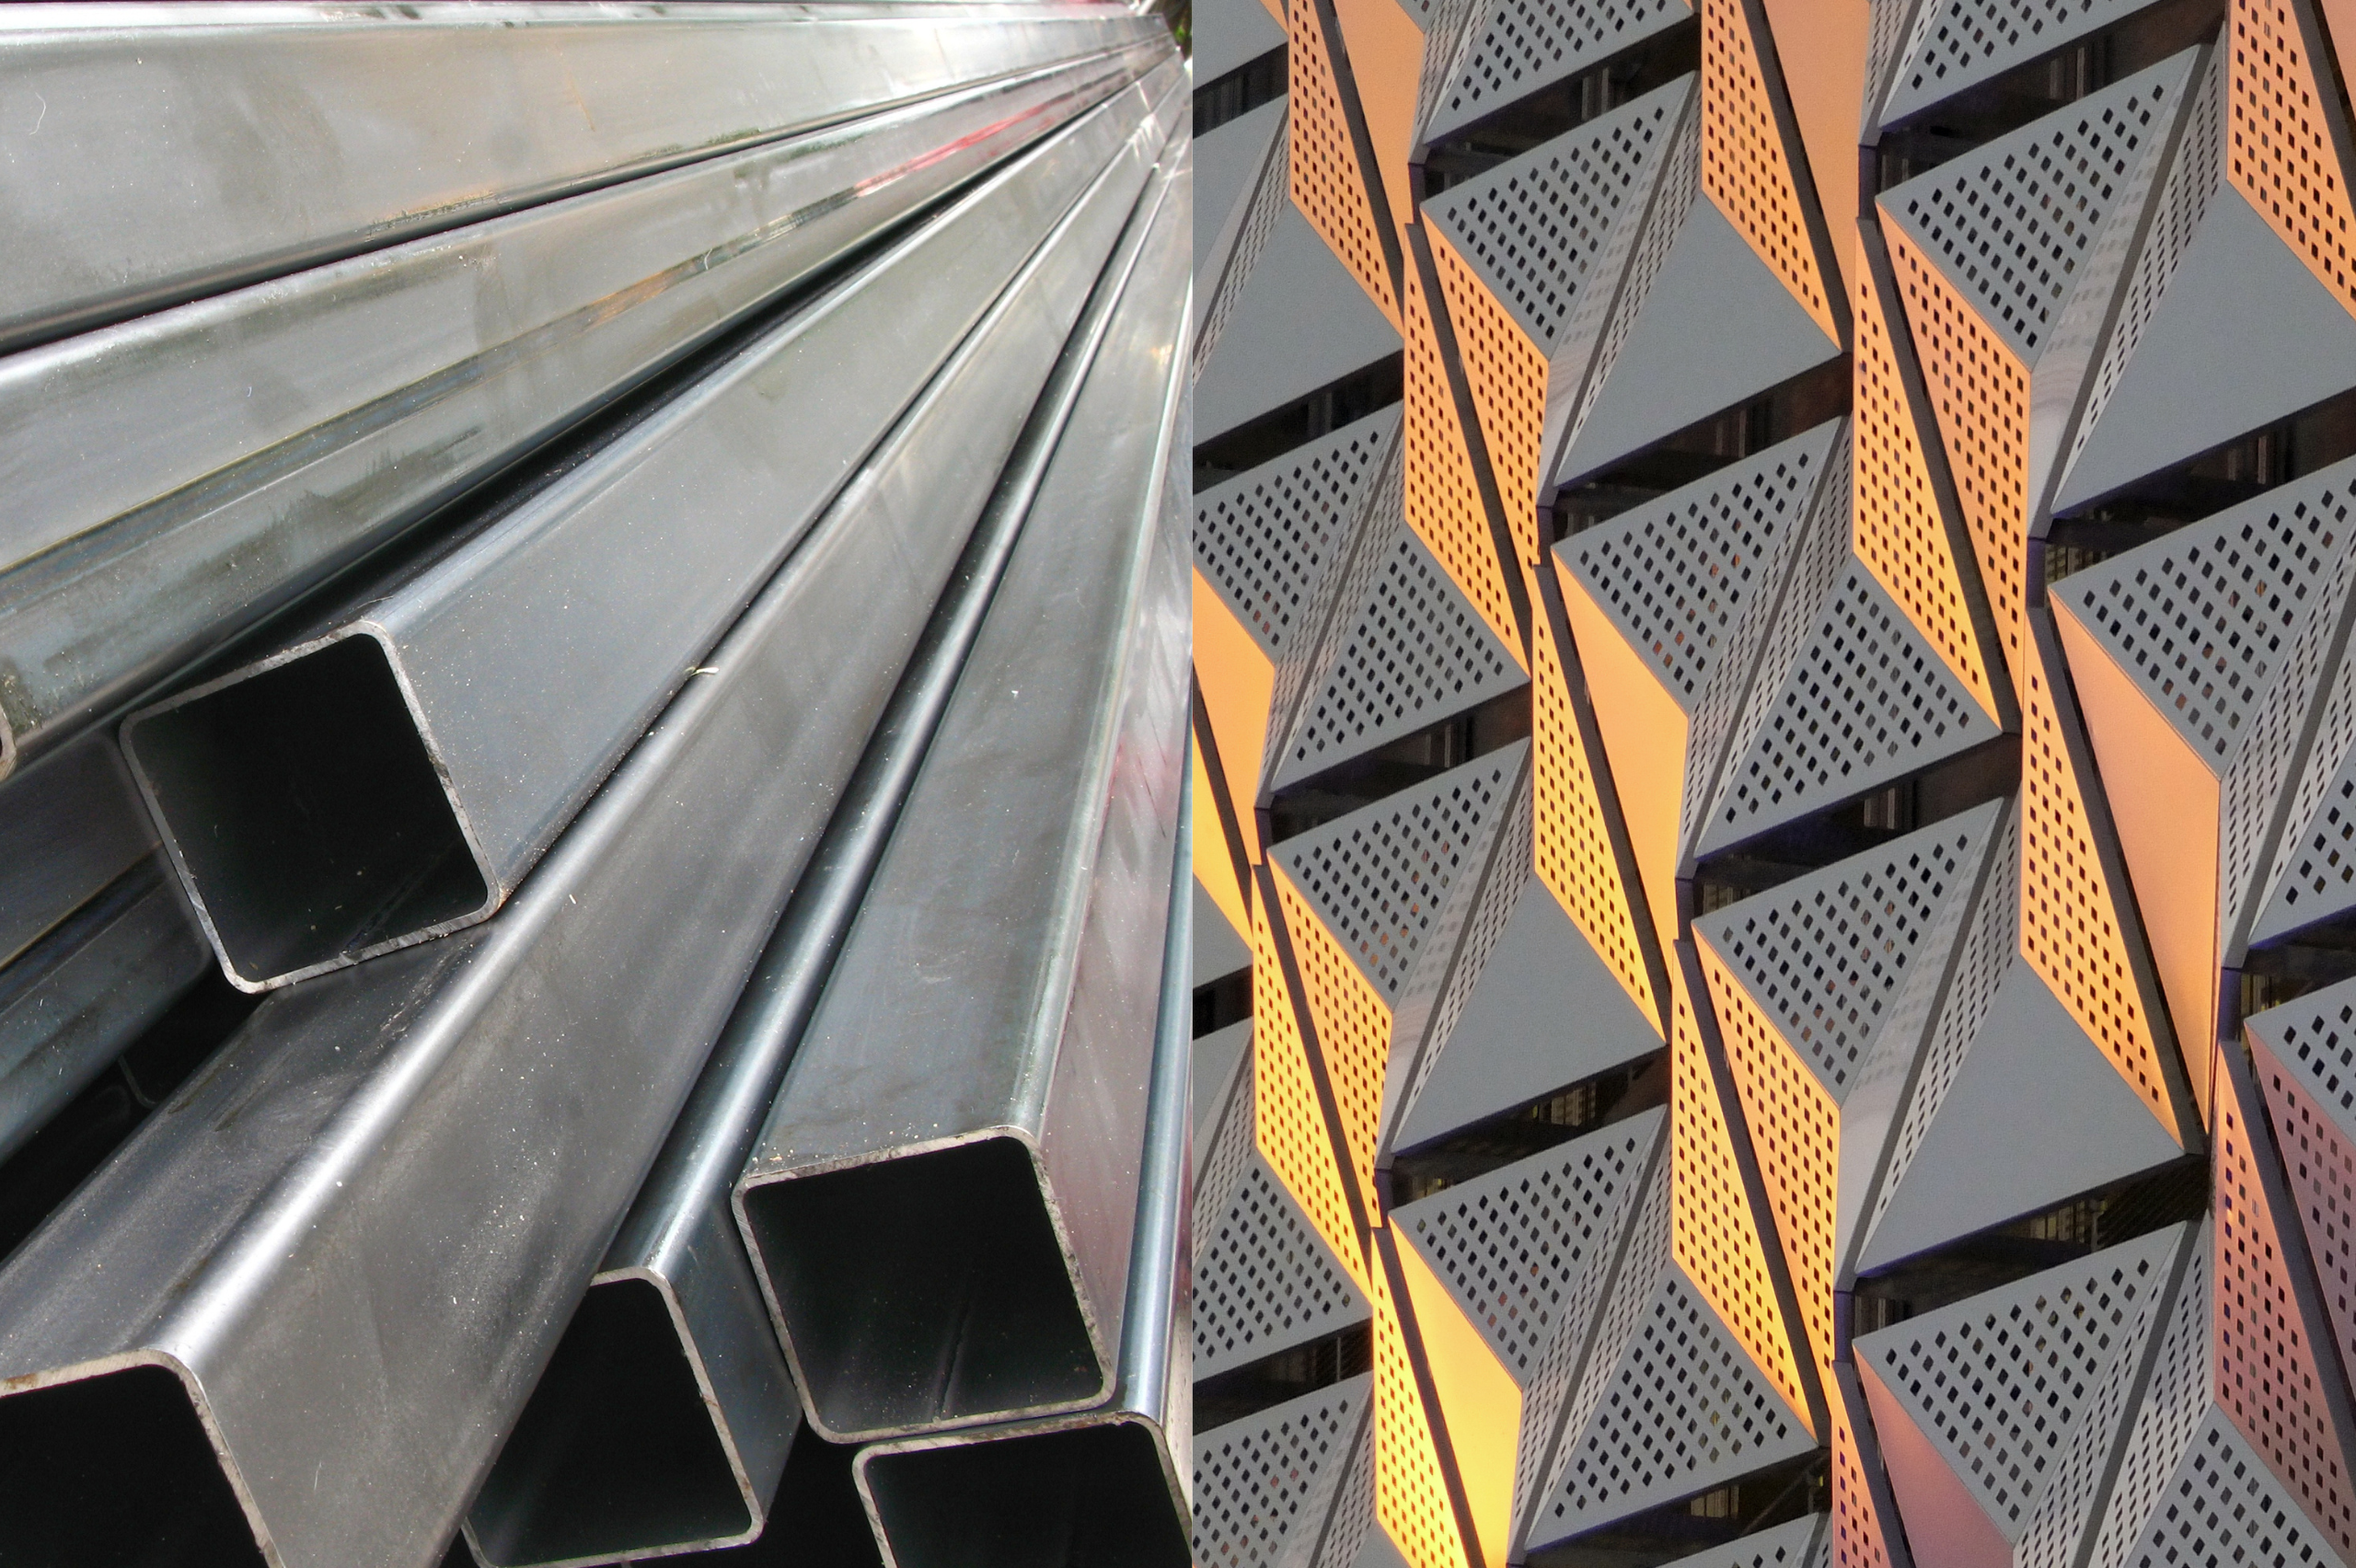 What's The Difference Between Architectural Steel Fabrication And Structural Steel Fabrication?